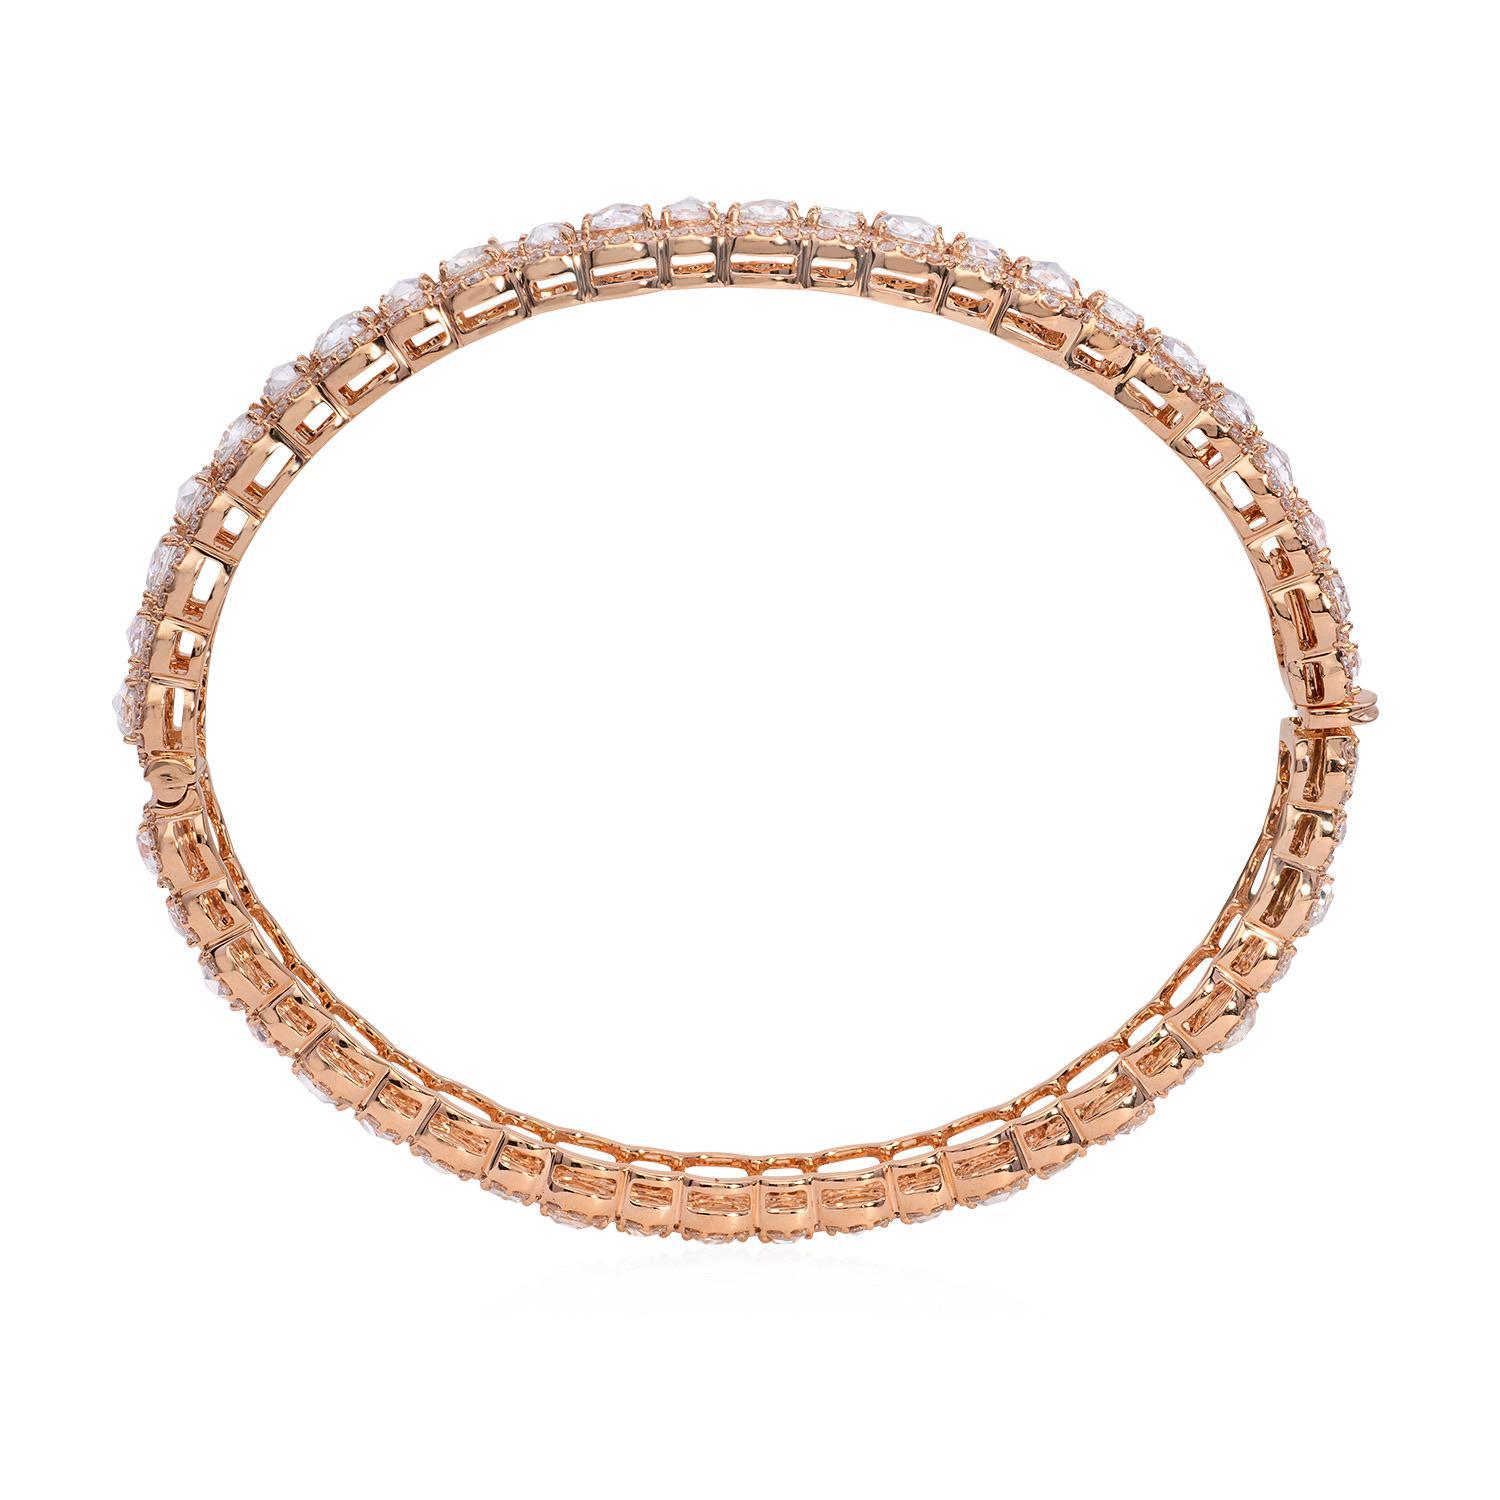 The Serena Bracelet Gold is an exquisite piece of jewelry that exudes elegance and sophistication. Crafted with utmost precision and attention to detail, this bracelet is a true masterpiece.

The bracelet features a stunning arrangement of Round